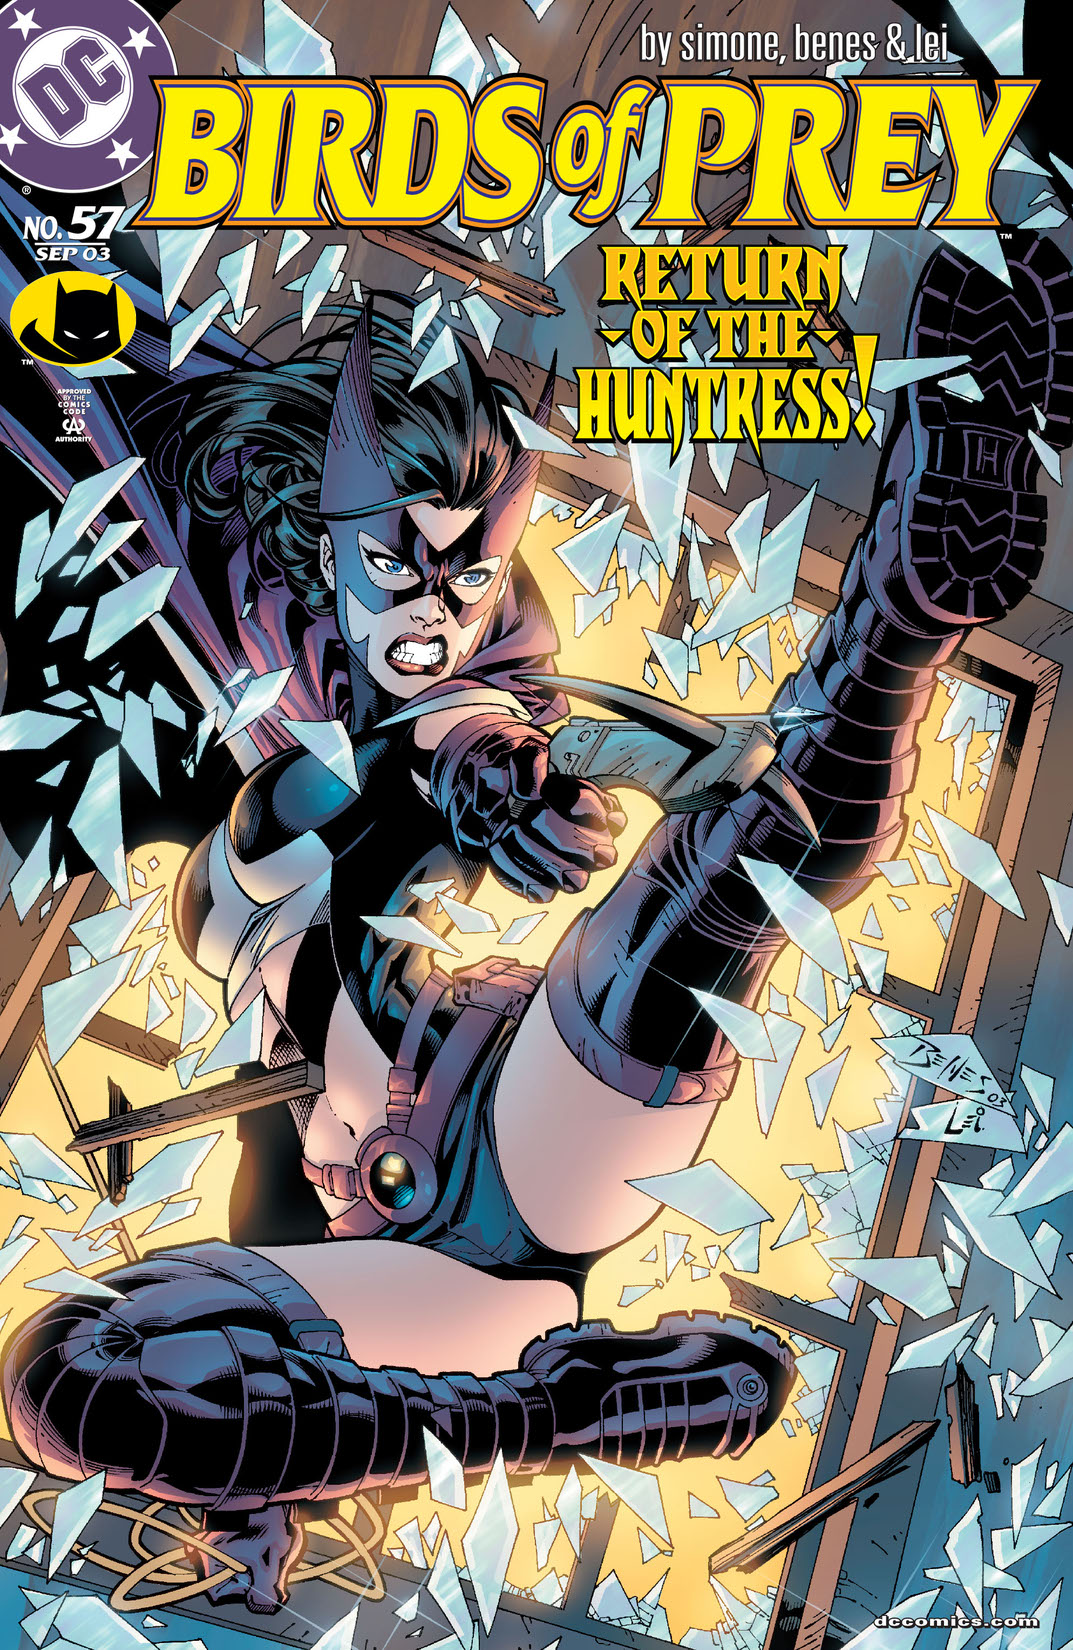 Birds of Prey () #57 preview images